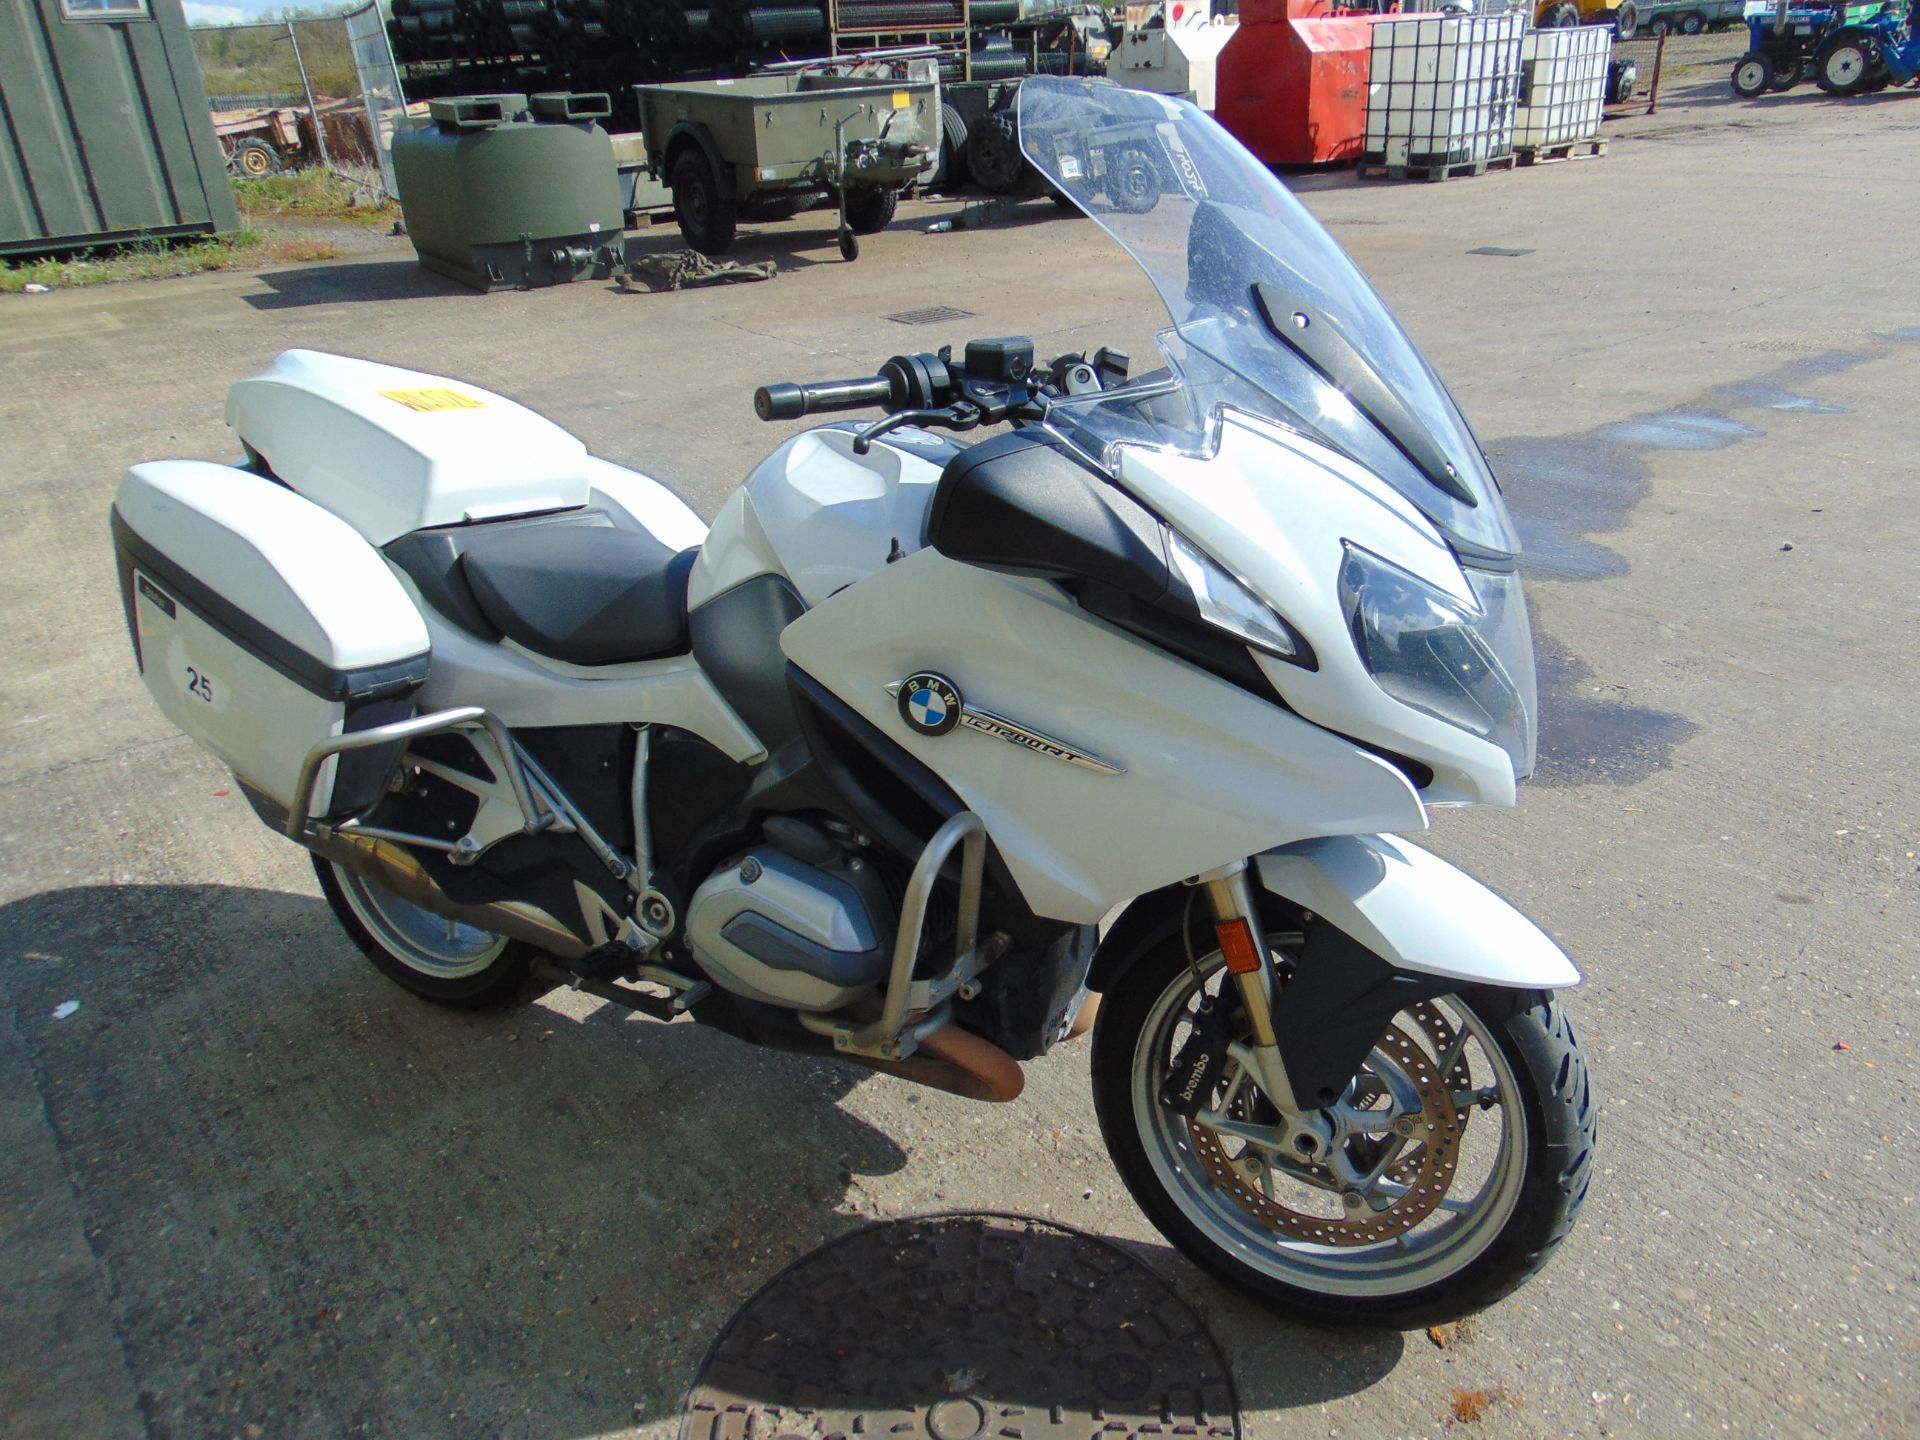 2018 BMW R1200RT Motorbike 50,000 miles from UK Police - Image 4 of 38